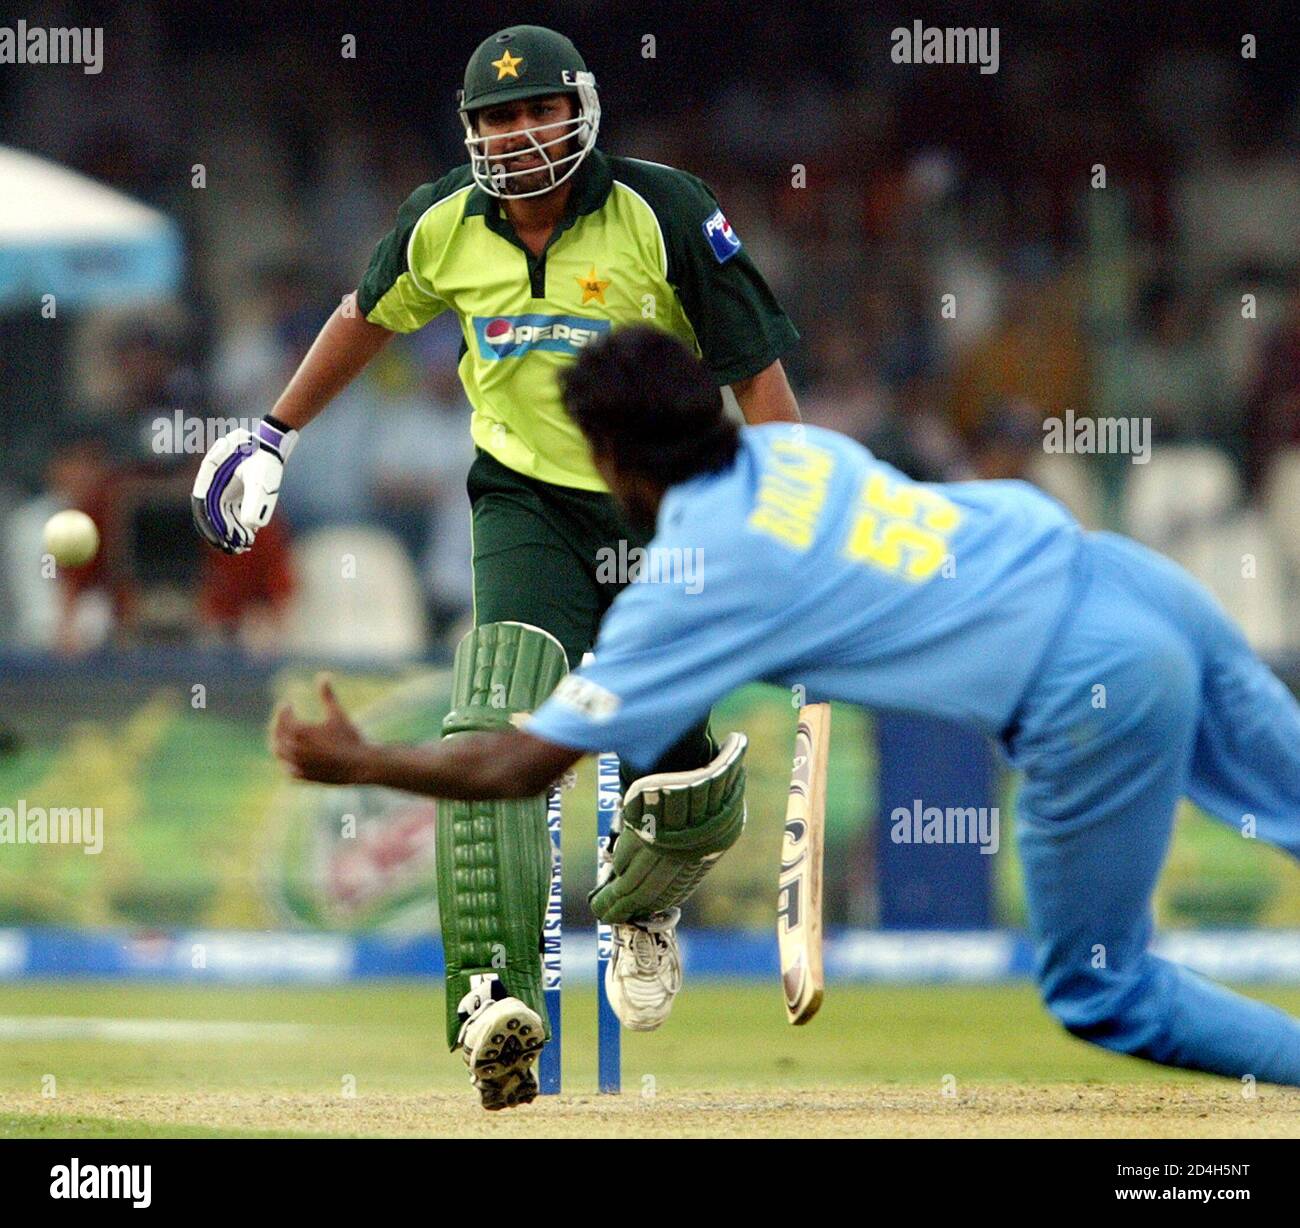 India's Lakshmipati Balaji dives trying to stop a shot from Pakistan's  Inzamam-ul Haq (behind) in